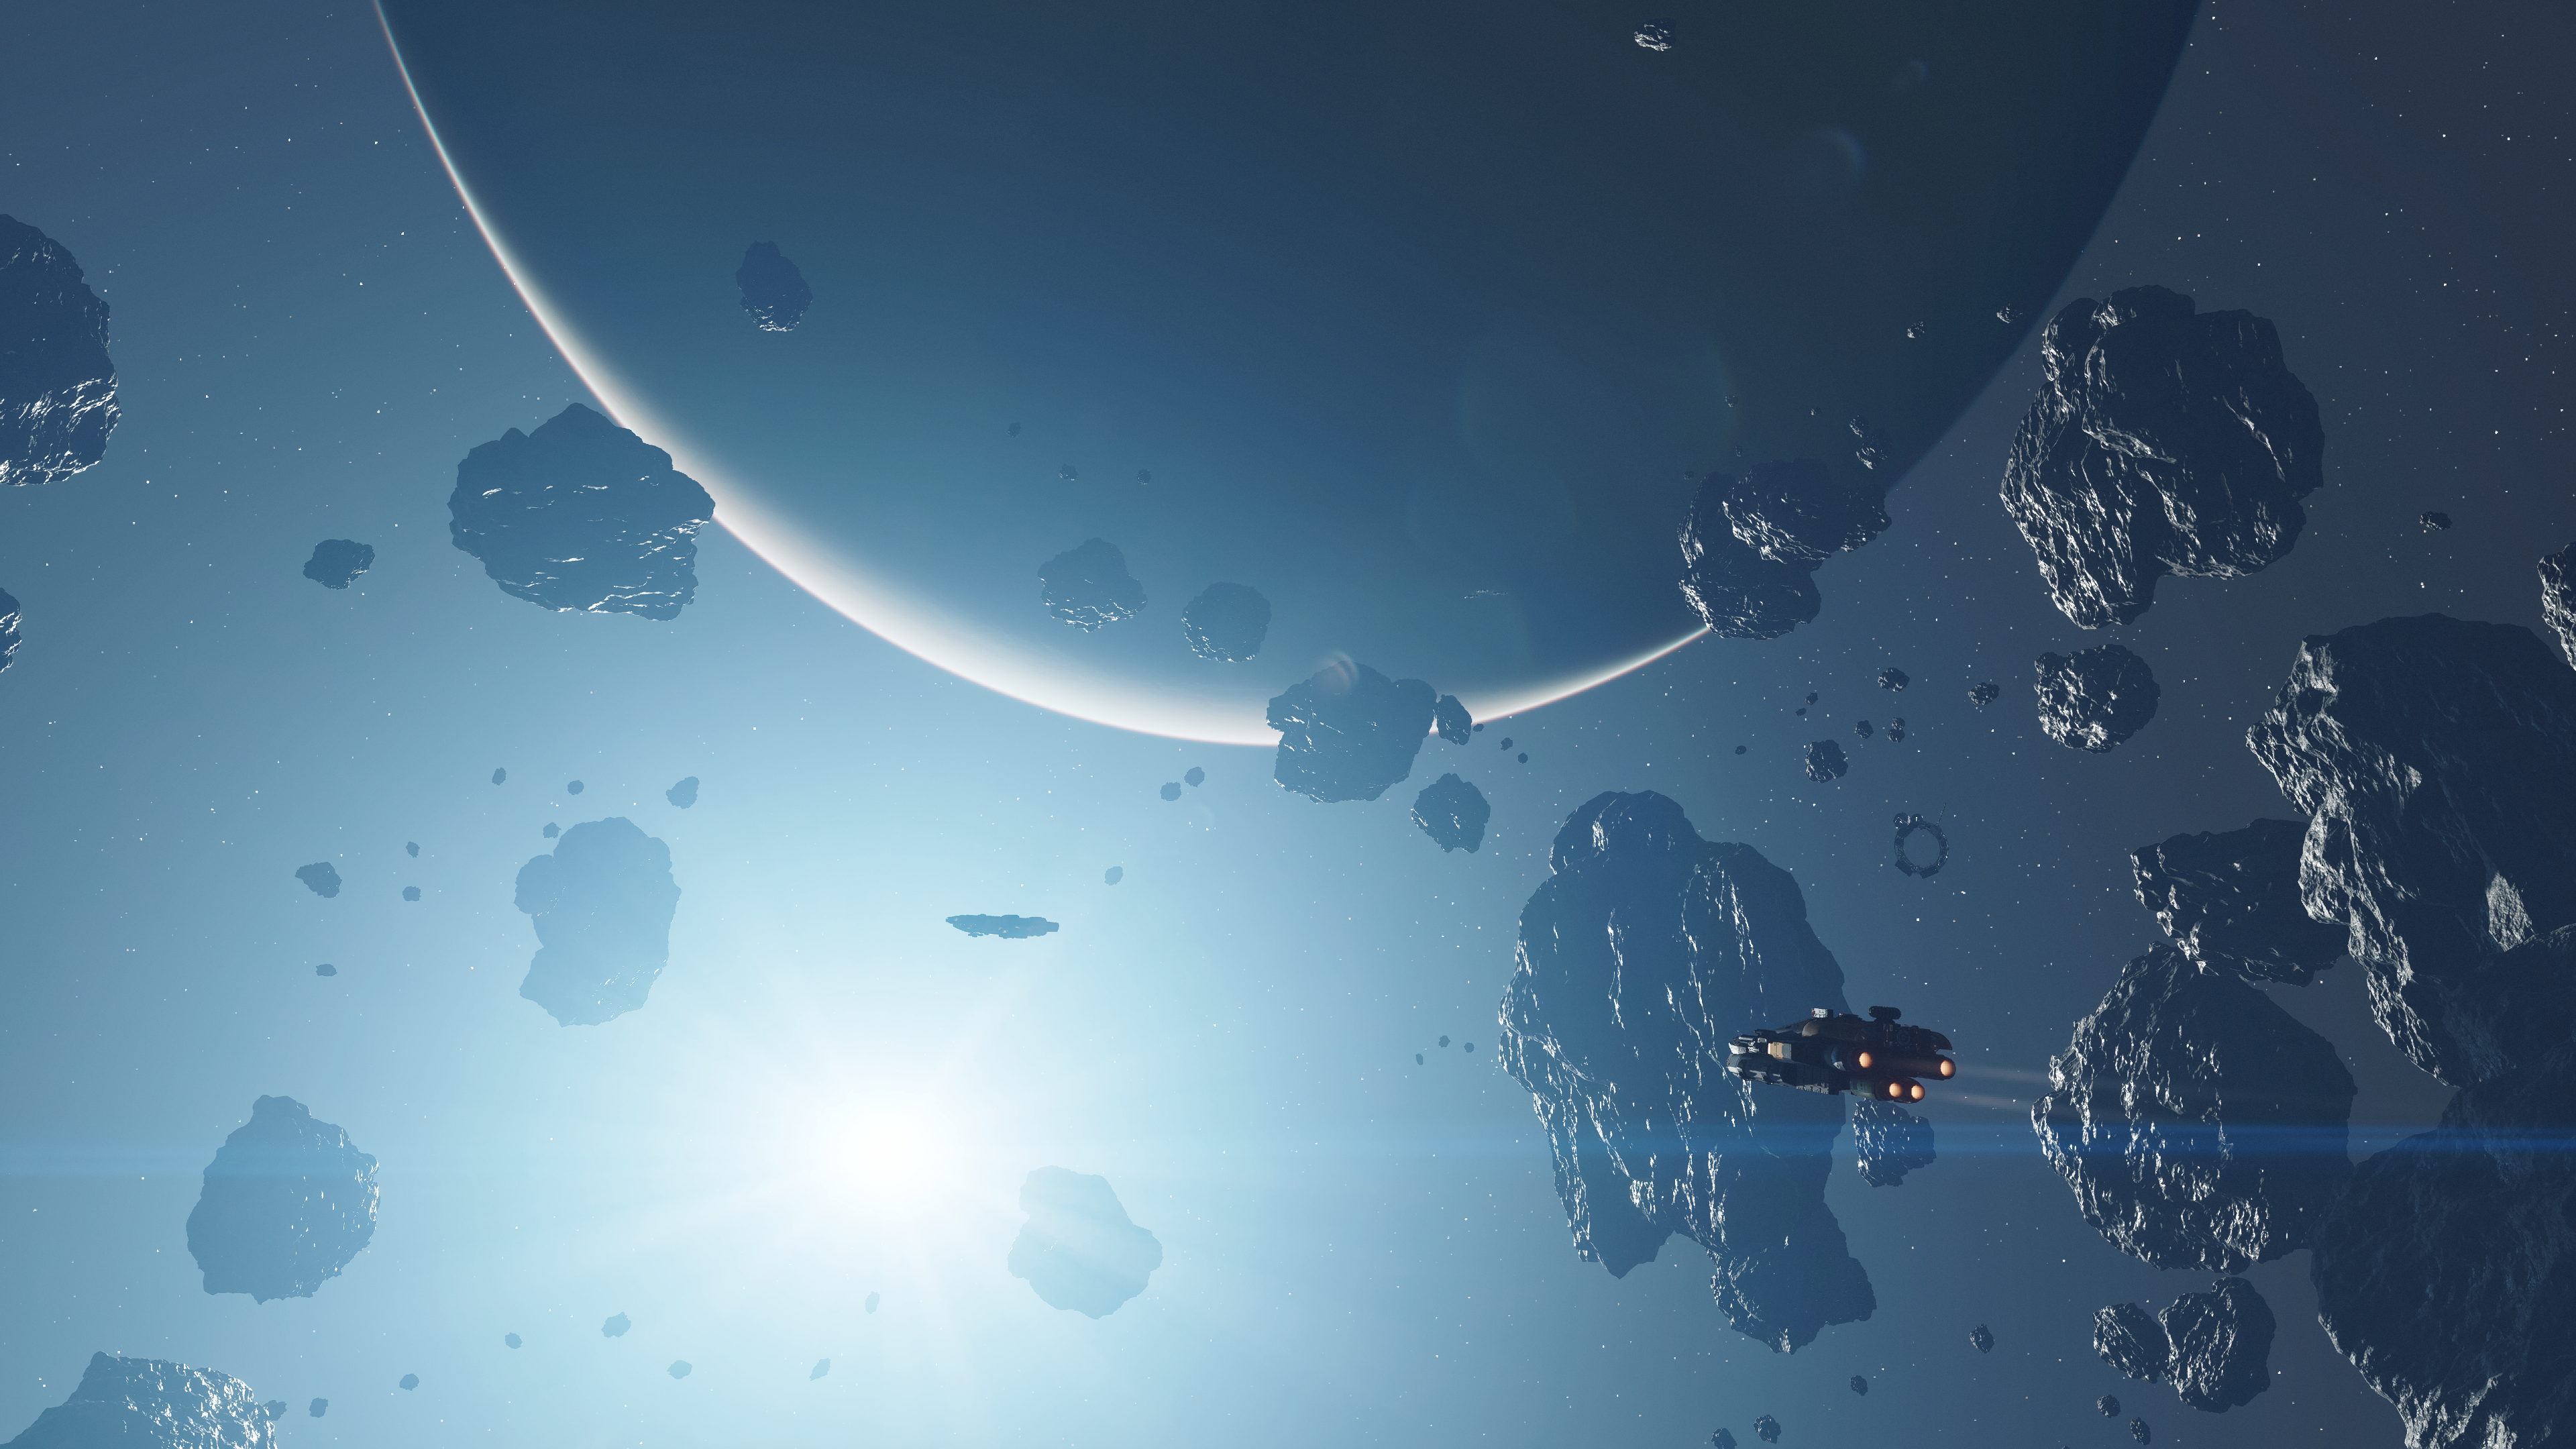 A screenshot of Venus from orbit in Starfield. The planet hangs in the top center of the image, backlit by the Sun offset near the bottom. In the foreground are two spaceships amid a field of asteroids.